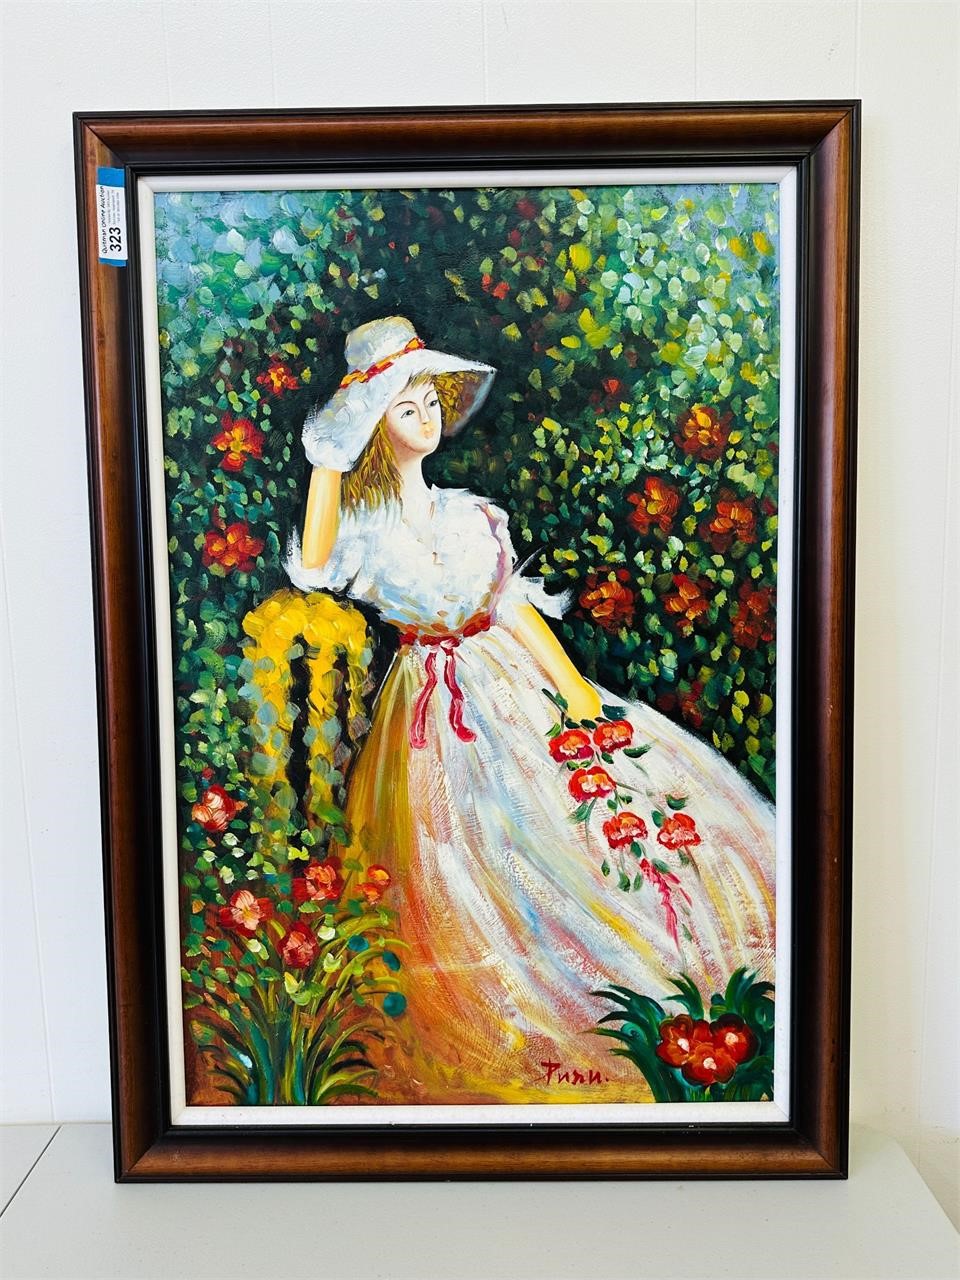 Framed Oil Painting on Canvas - O/C